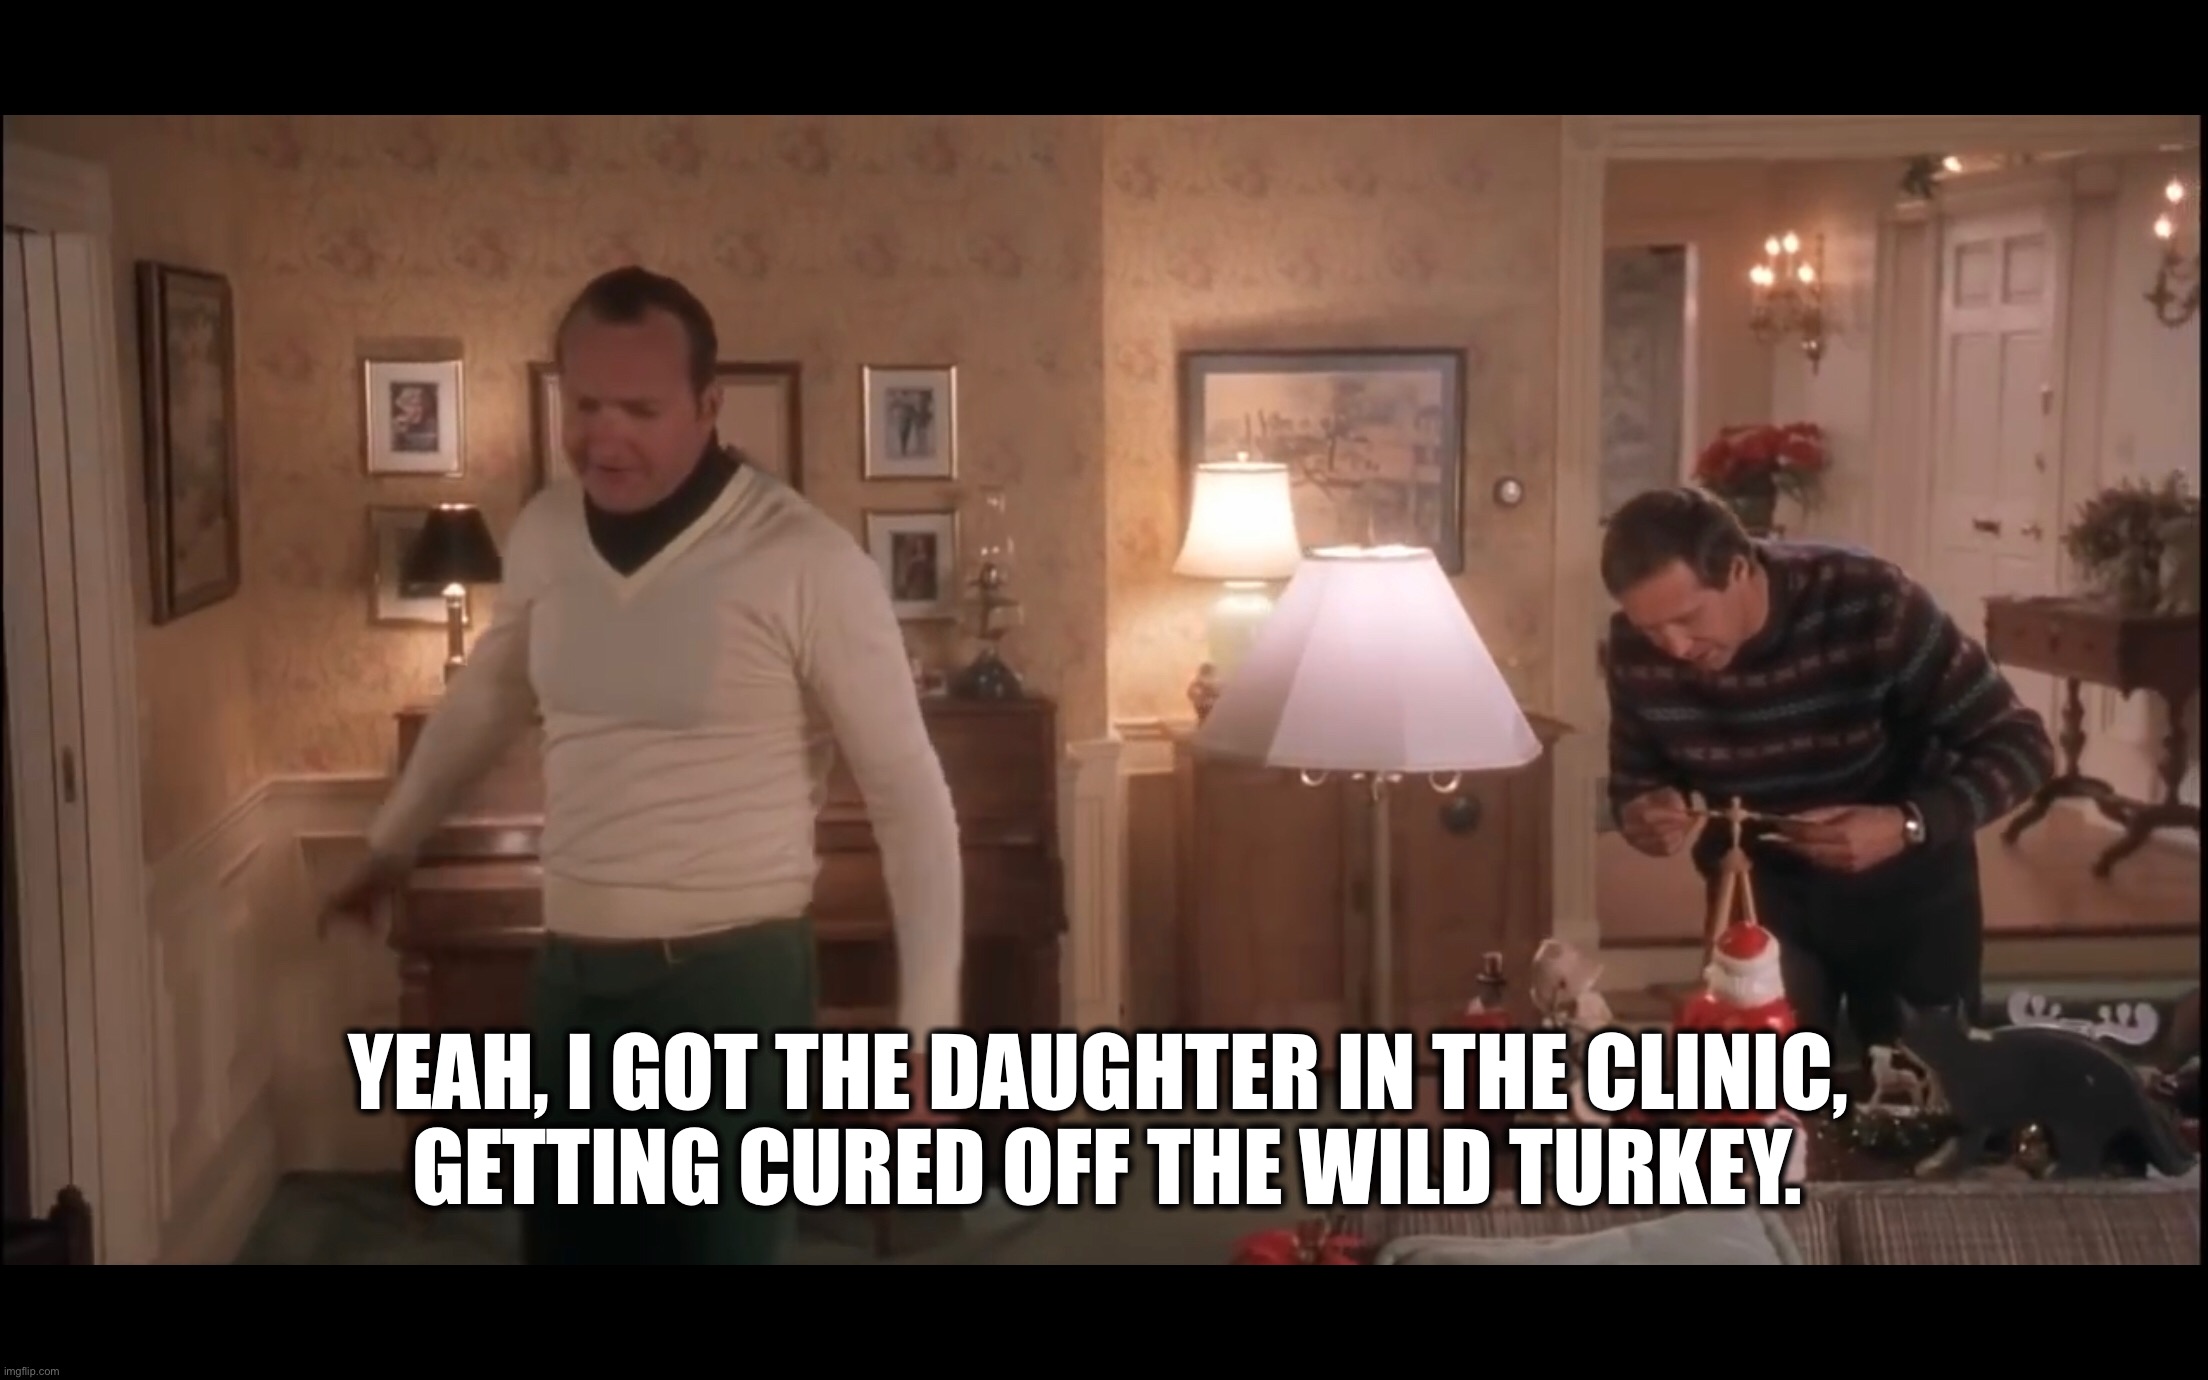 YEAH, I GOT THE DAUGHTER IN THE CLINIC, 
GETTING CURED OFF THE WILD TURKEY. | image tagged in christmas vacation,christmas,funny memes,memes,christmas memes,christmas meme | made w/ Imgflip meme maker